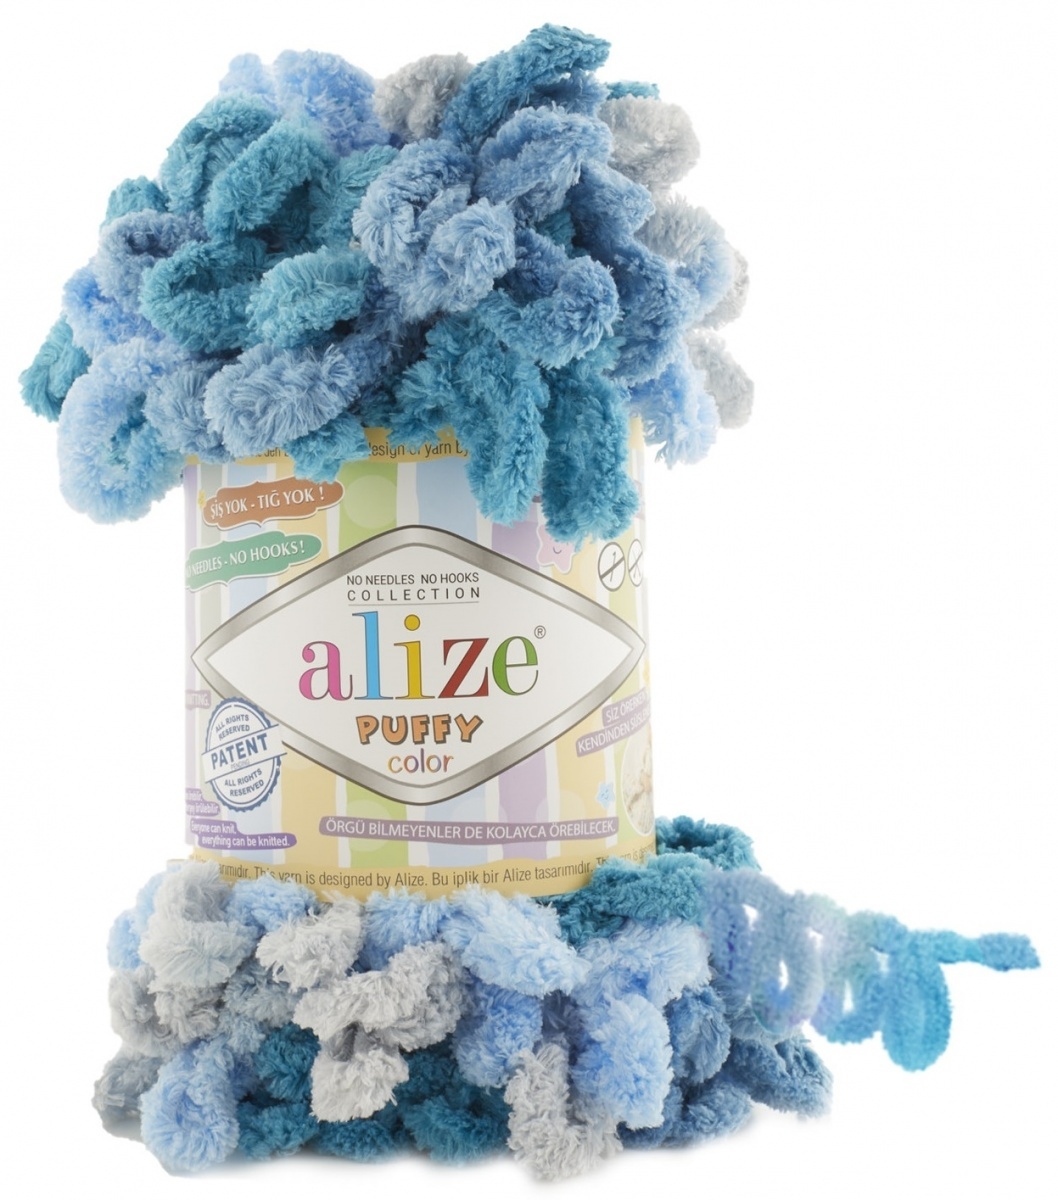 Alize Puffy Color, 100% Micropolyester 5 Skein Value Pack, 500g фото 16